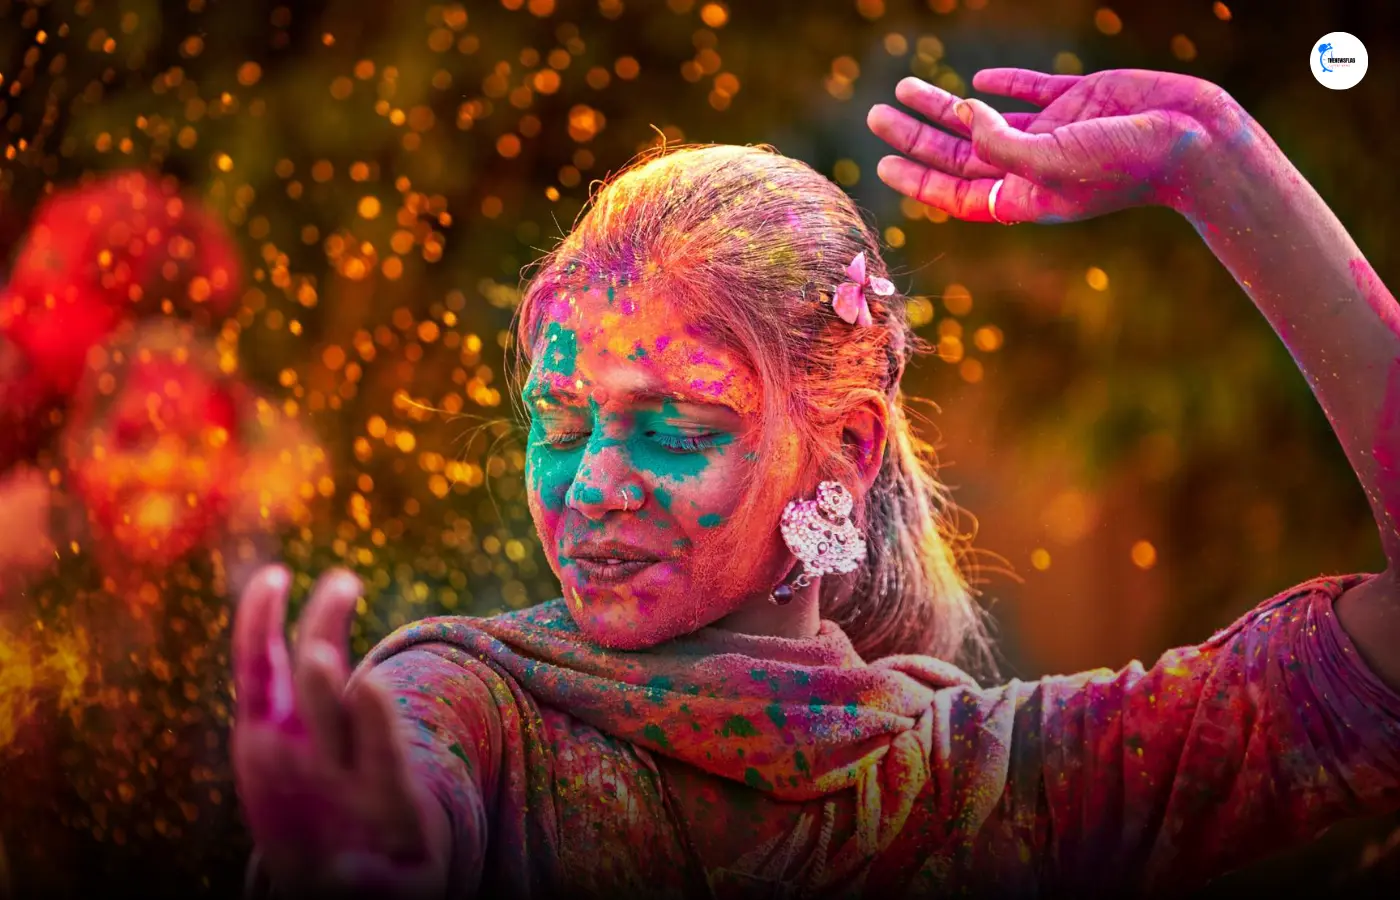 By which name Holi is recognized in Odisha